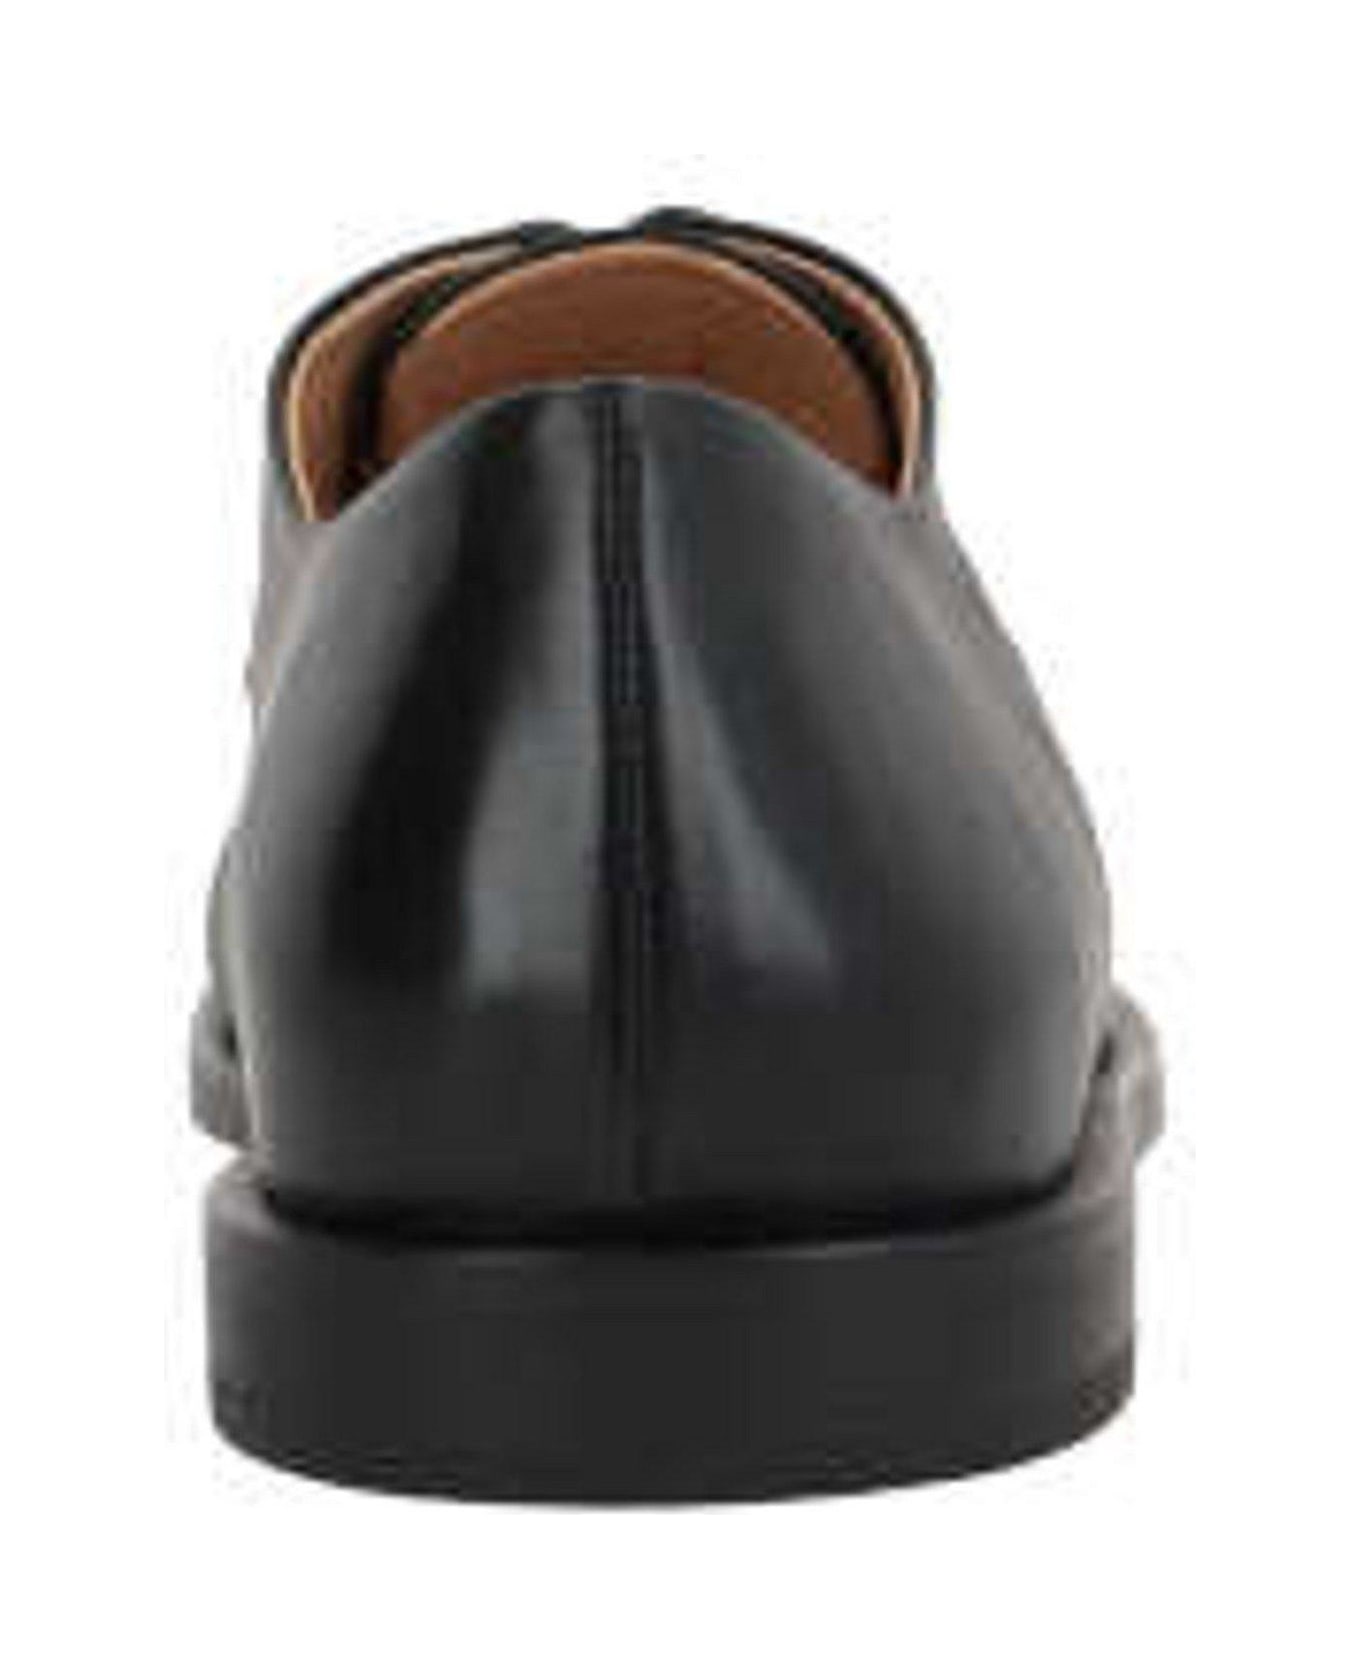 Marsell Almond Toe Mentone Derby Shoes - Black